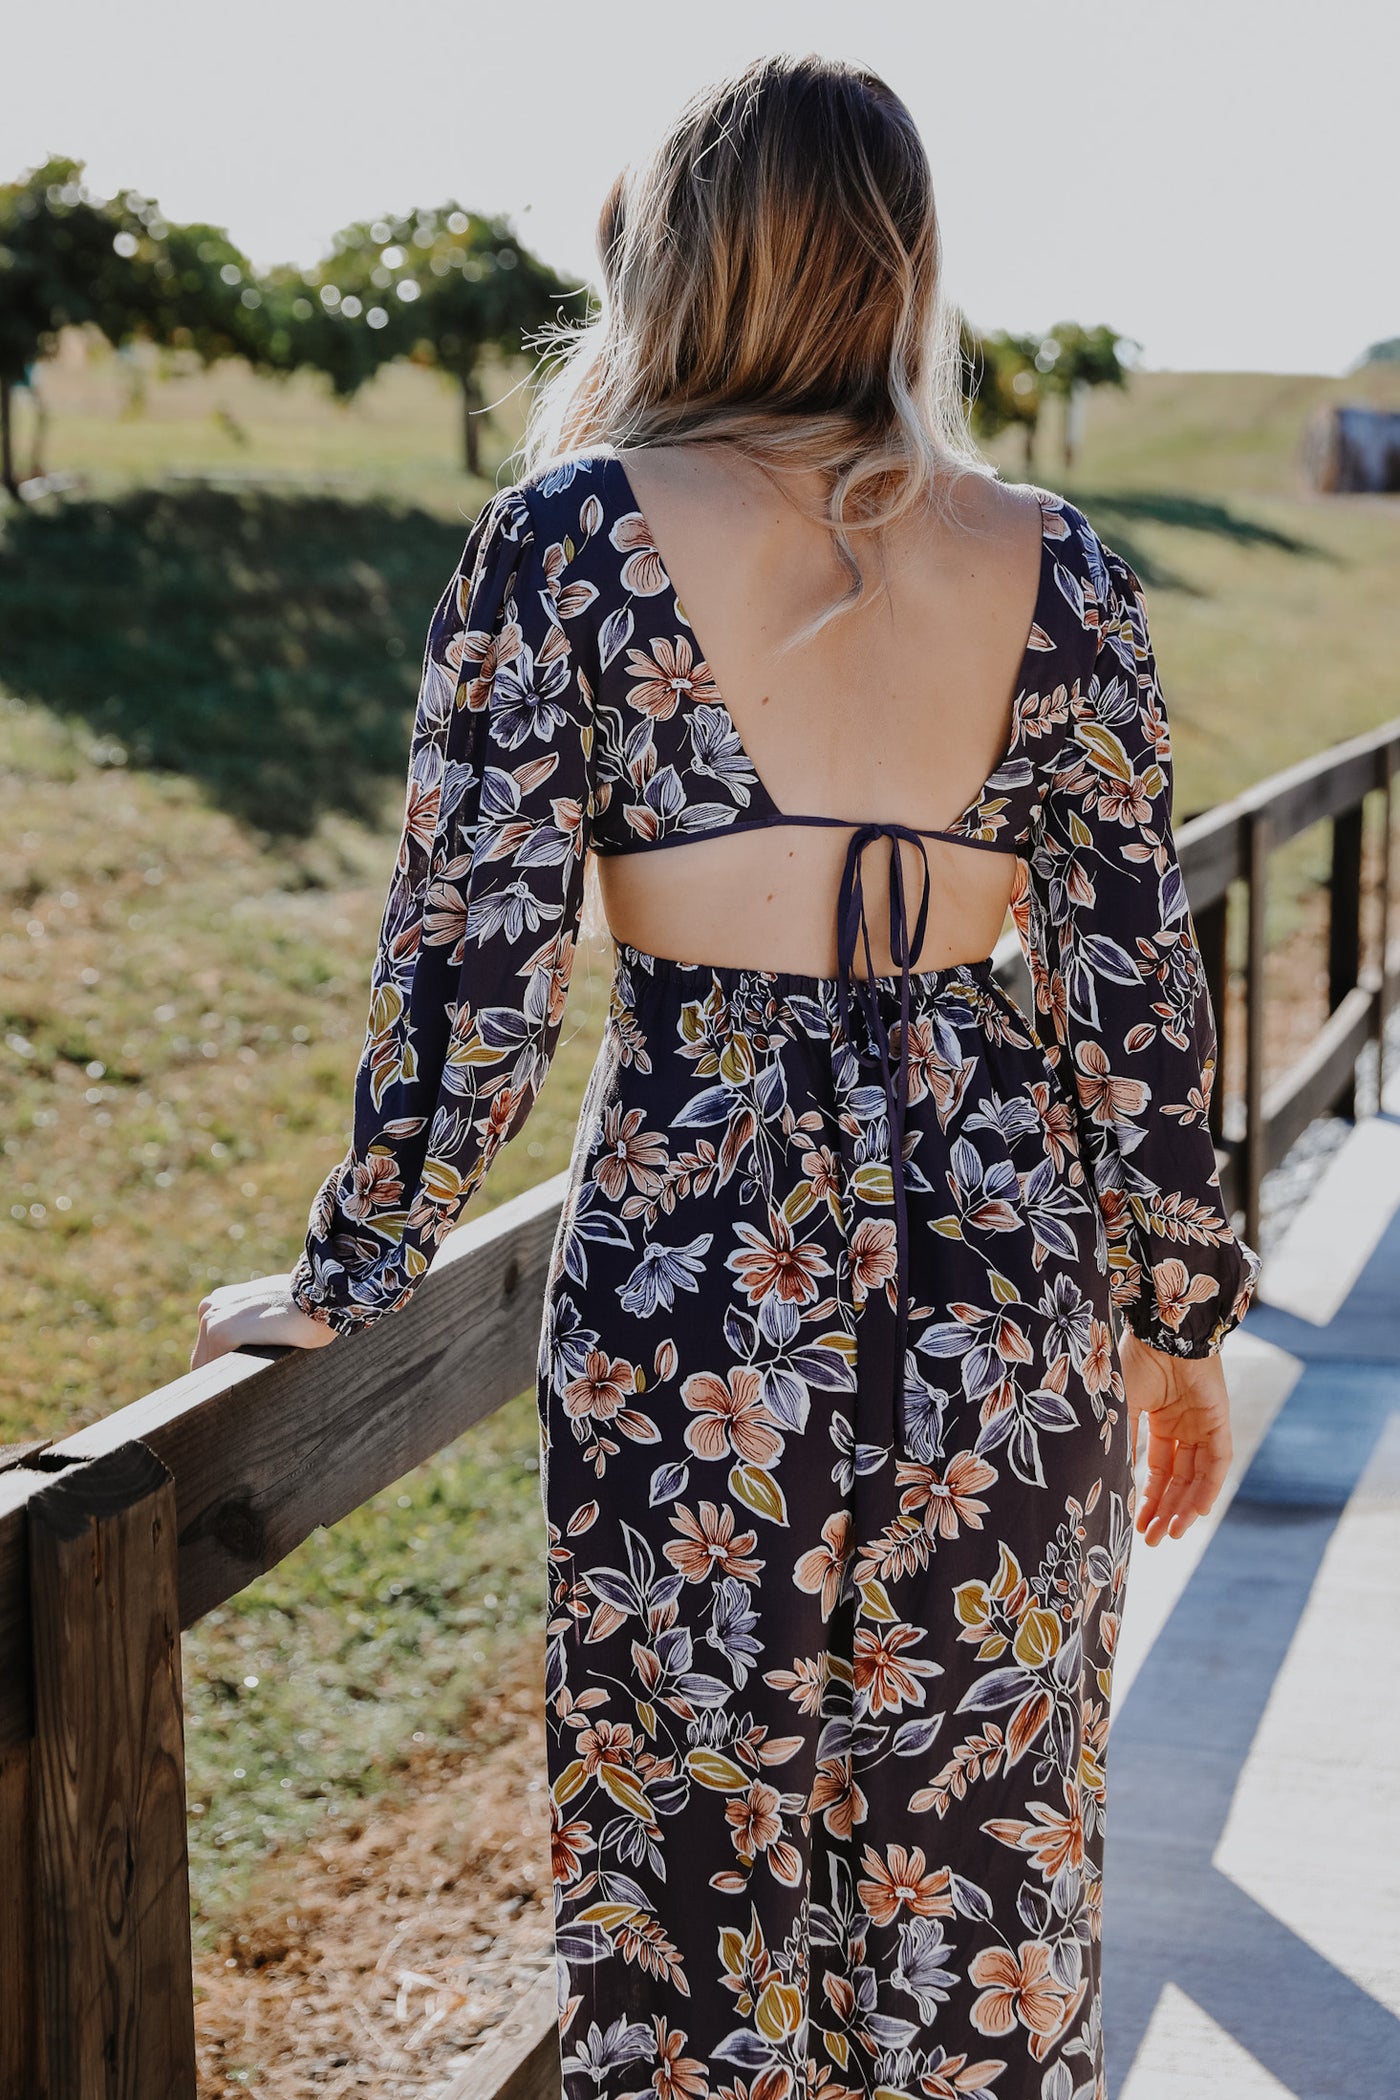 FINAL SALE - Romance In The Making Floral Cutout Maxi Dress